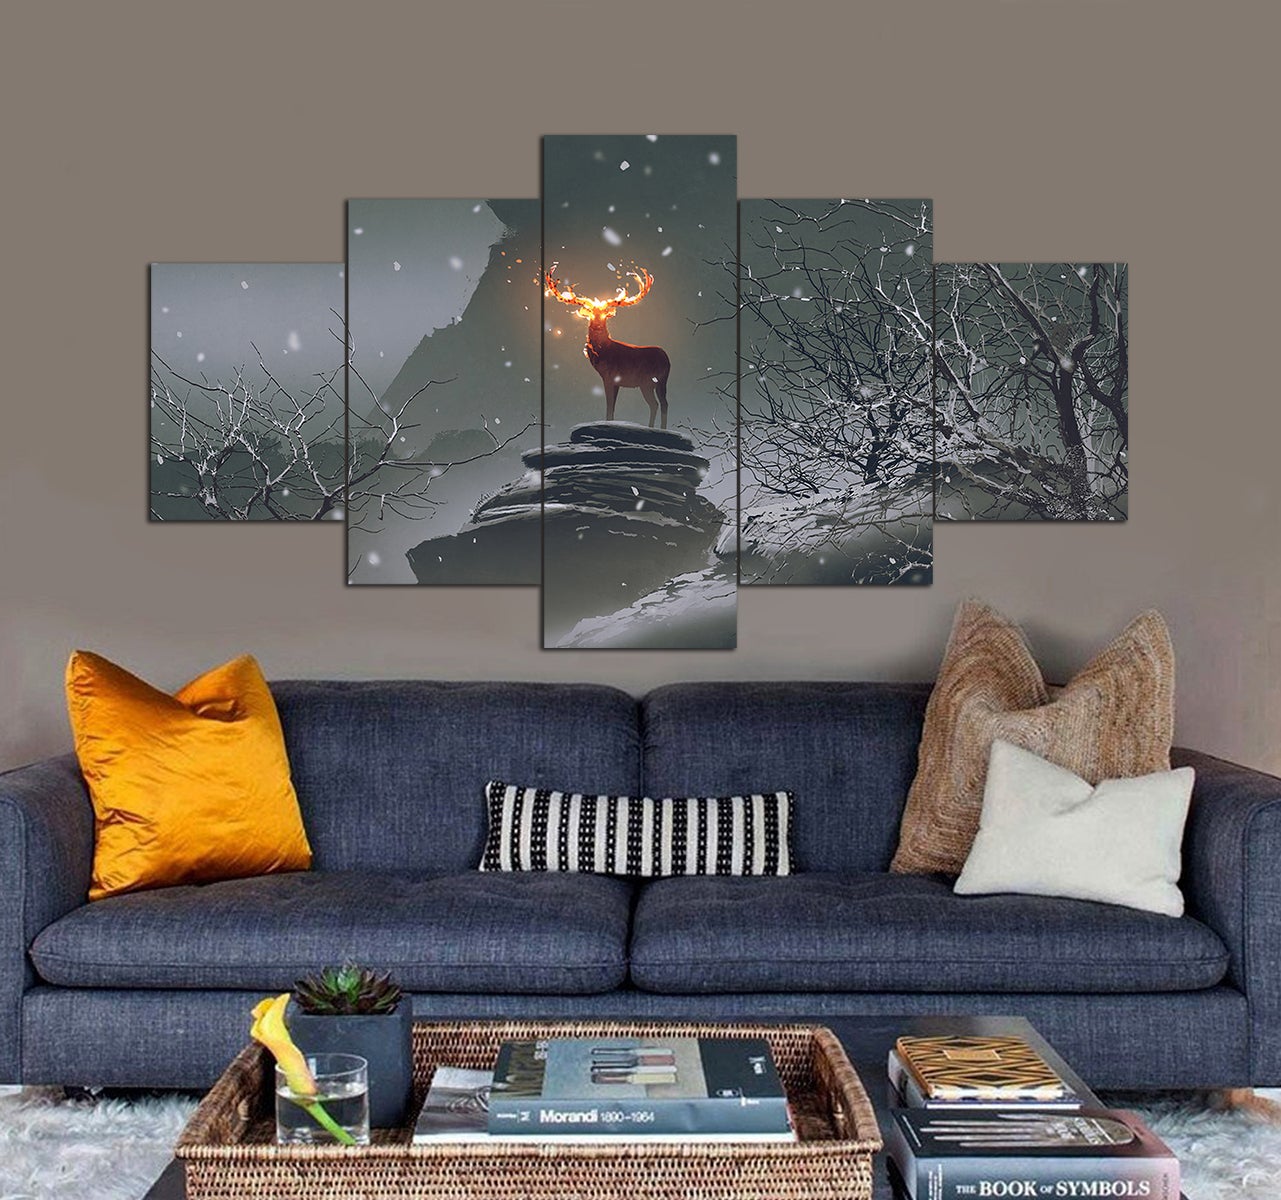 the deer with its fire horns on the rocks in the winter landscape 3D 5 piece canvas art